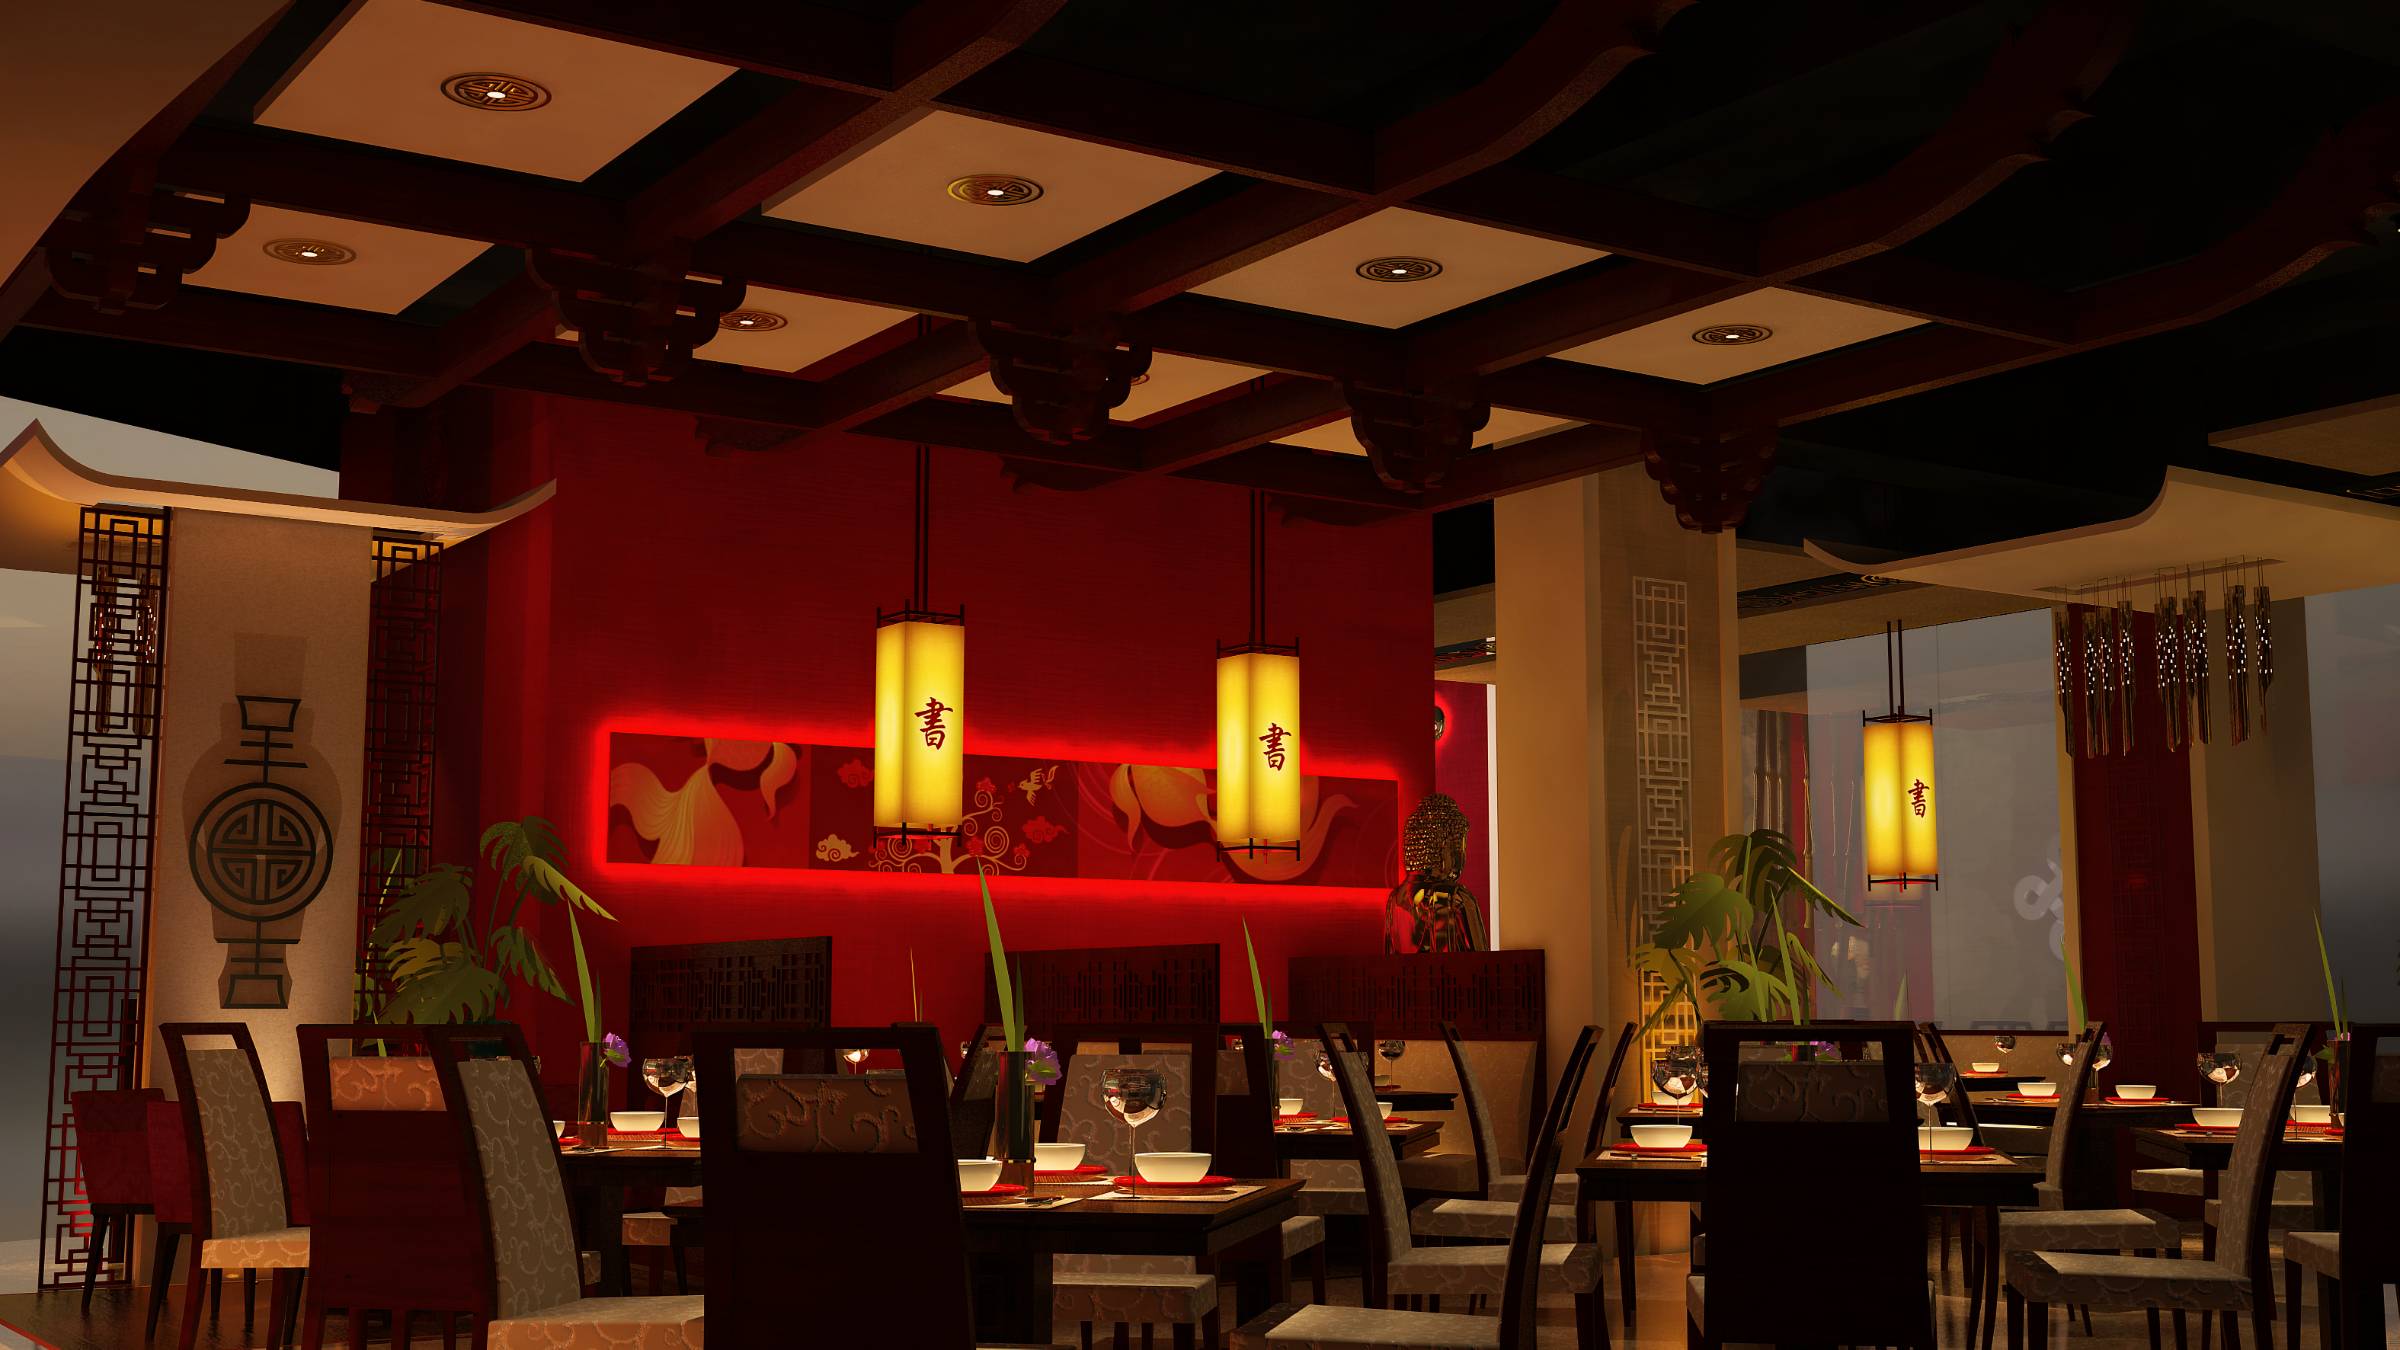 Asia Seven Fine Dining Restaurant Booth seating